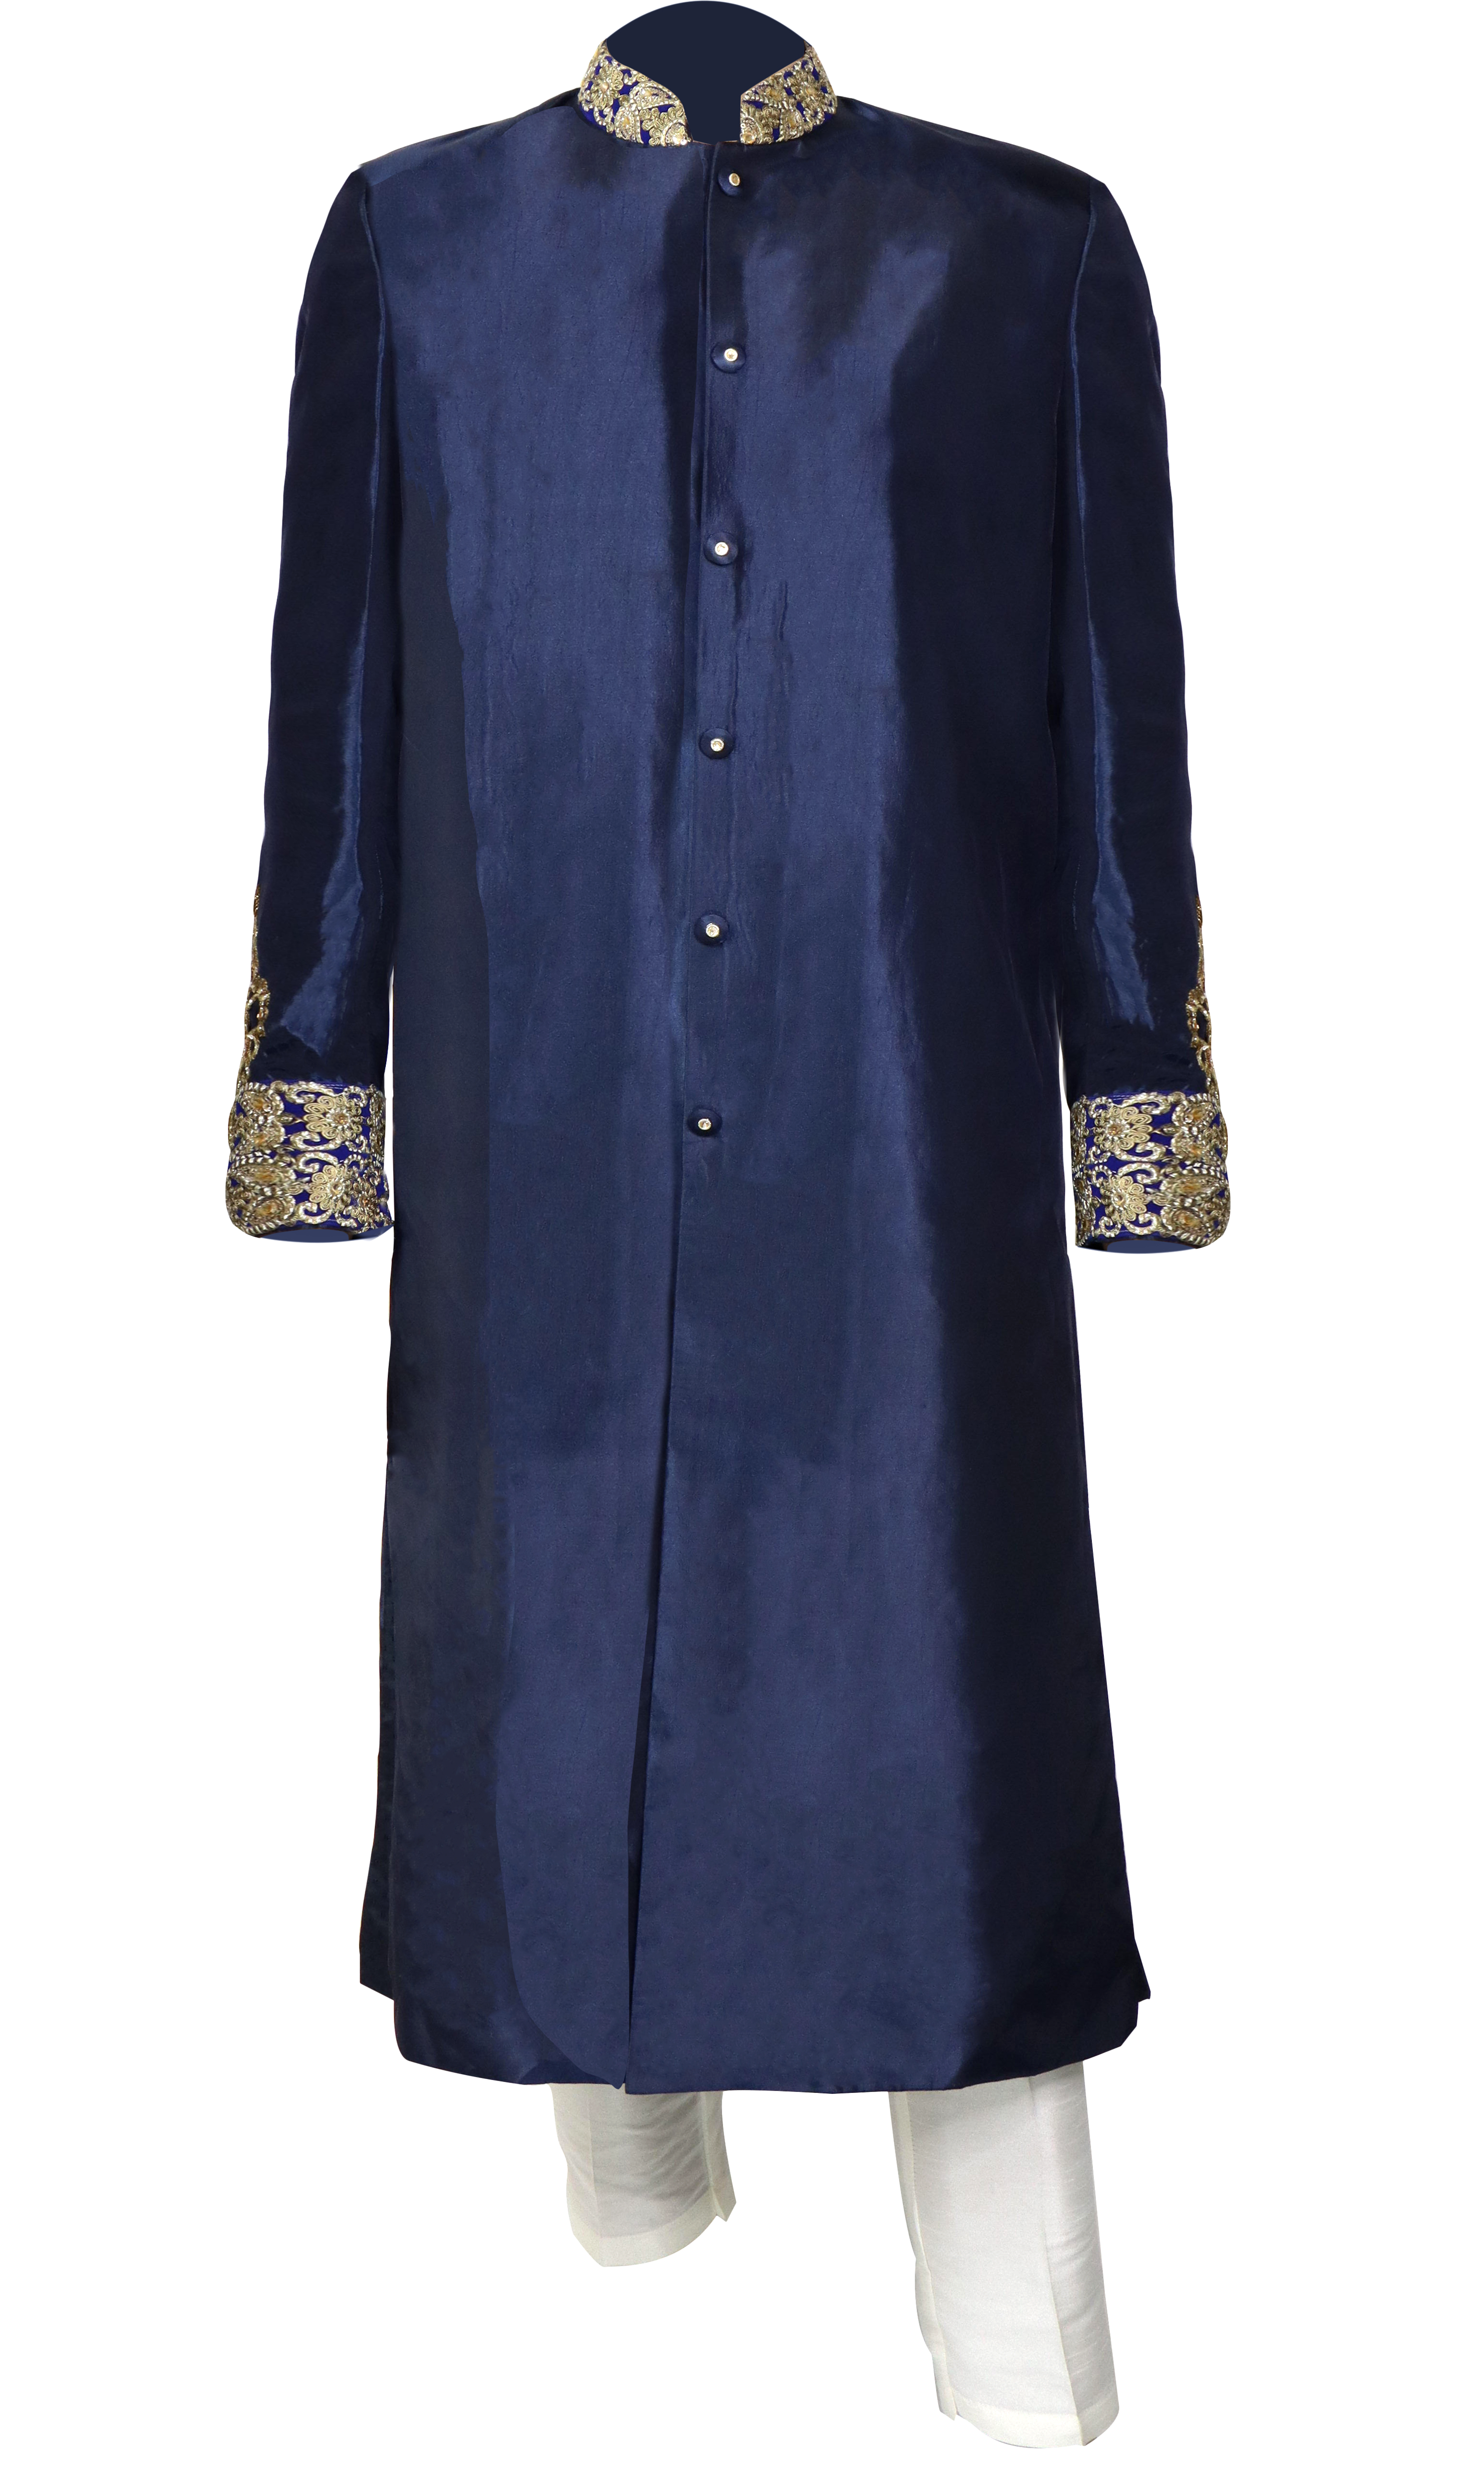 silky navy sherwani is accompanied with white pants but you can always pair it with your own pair of pants.